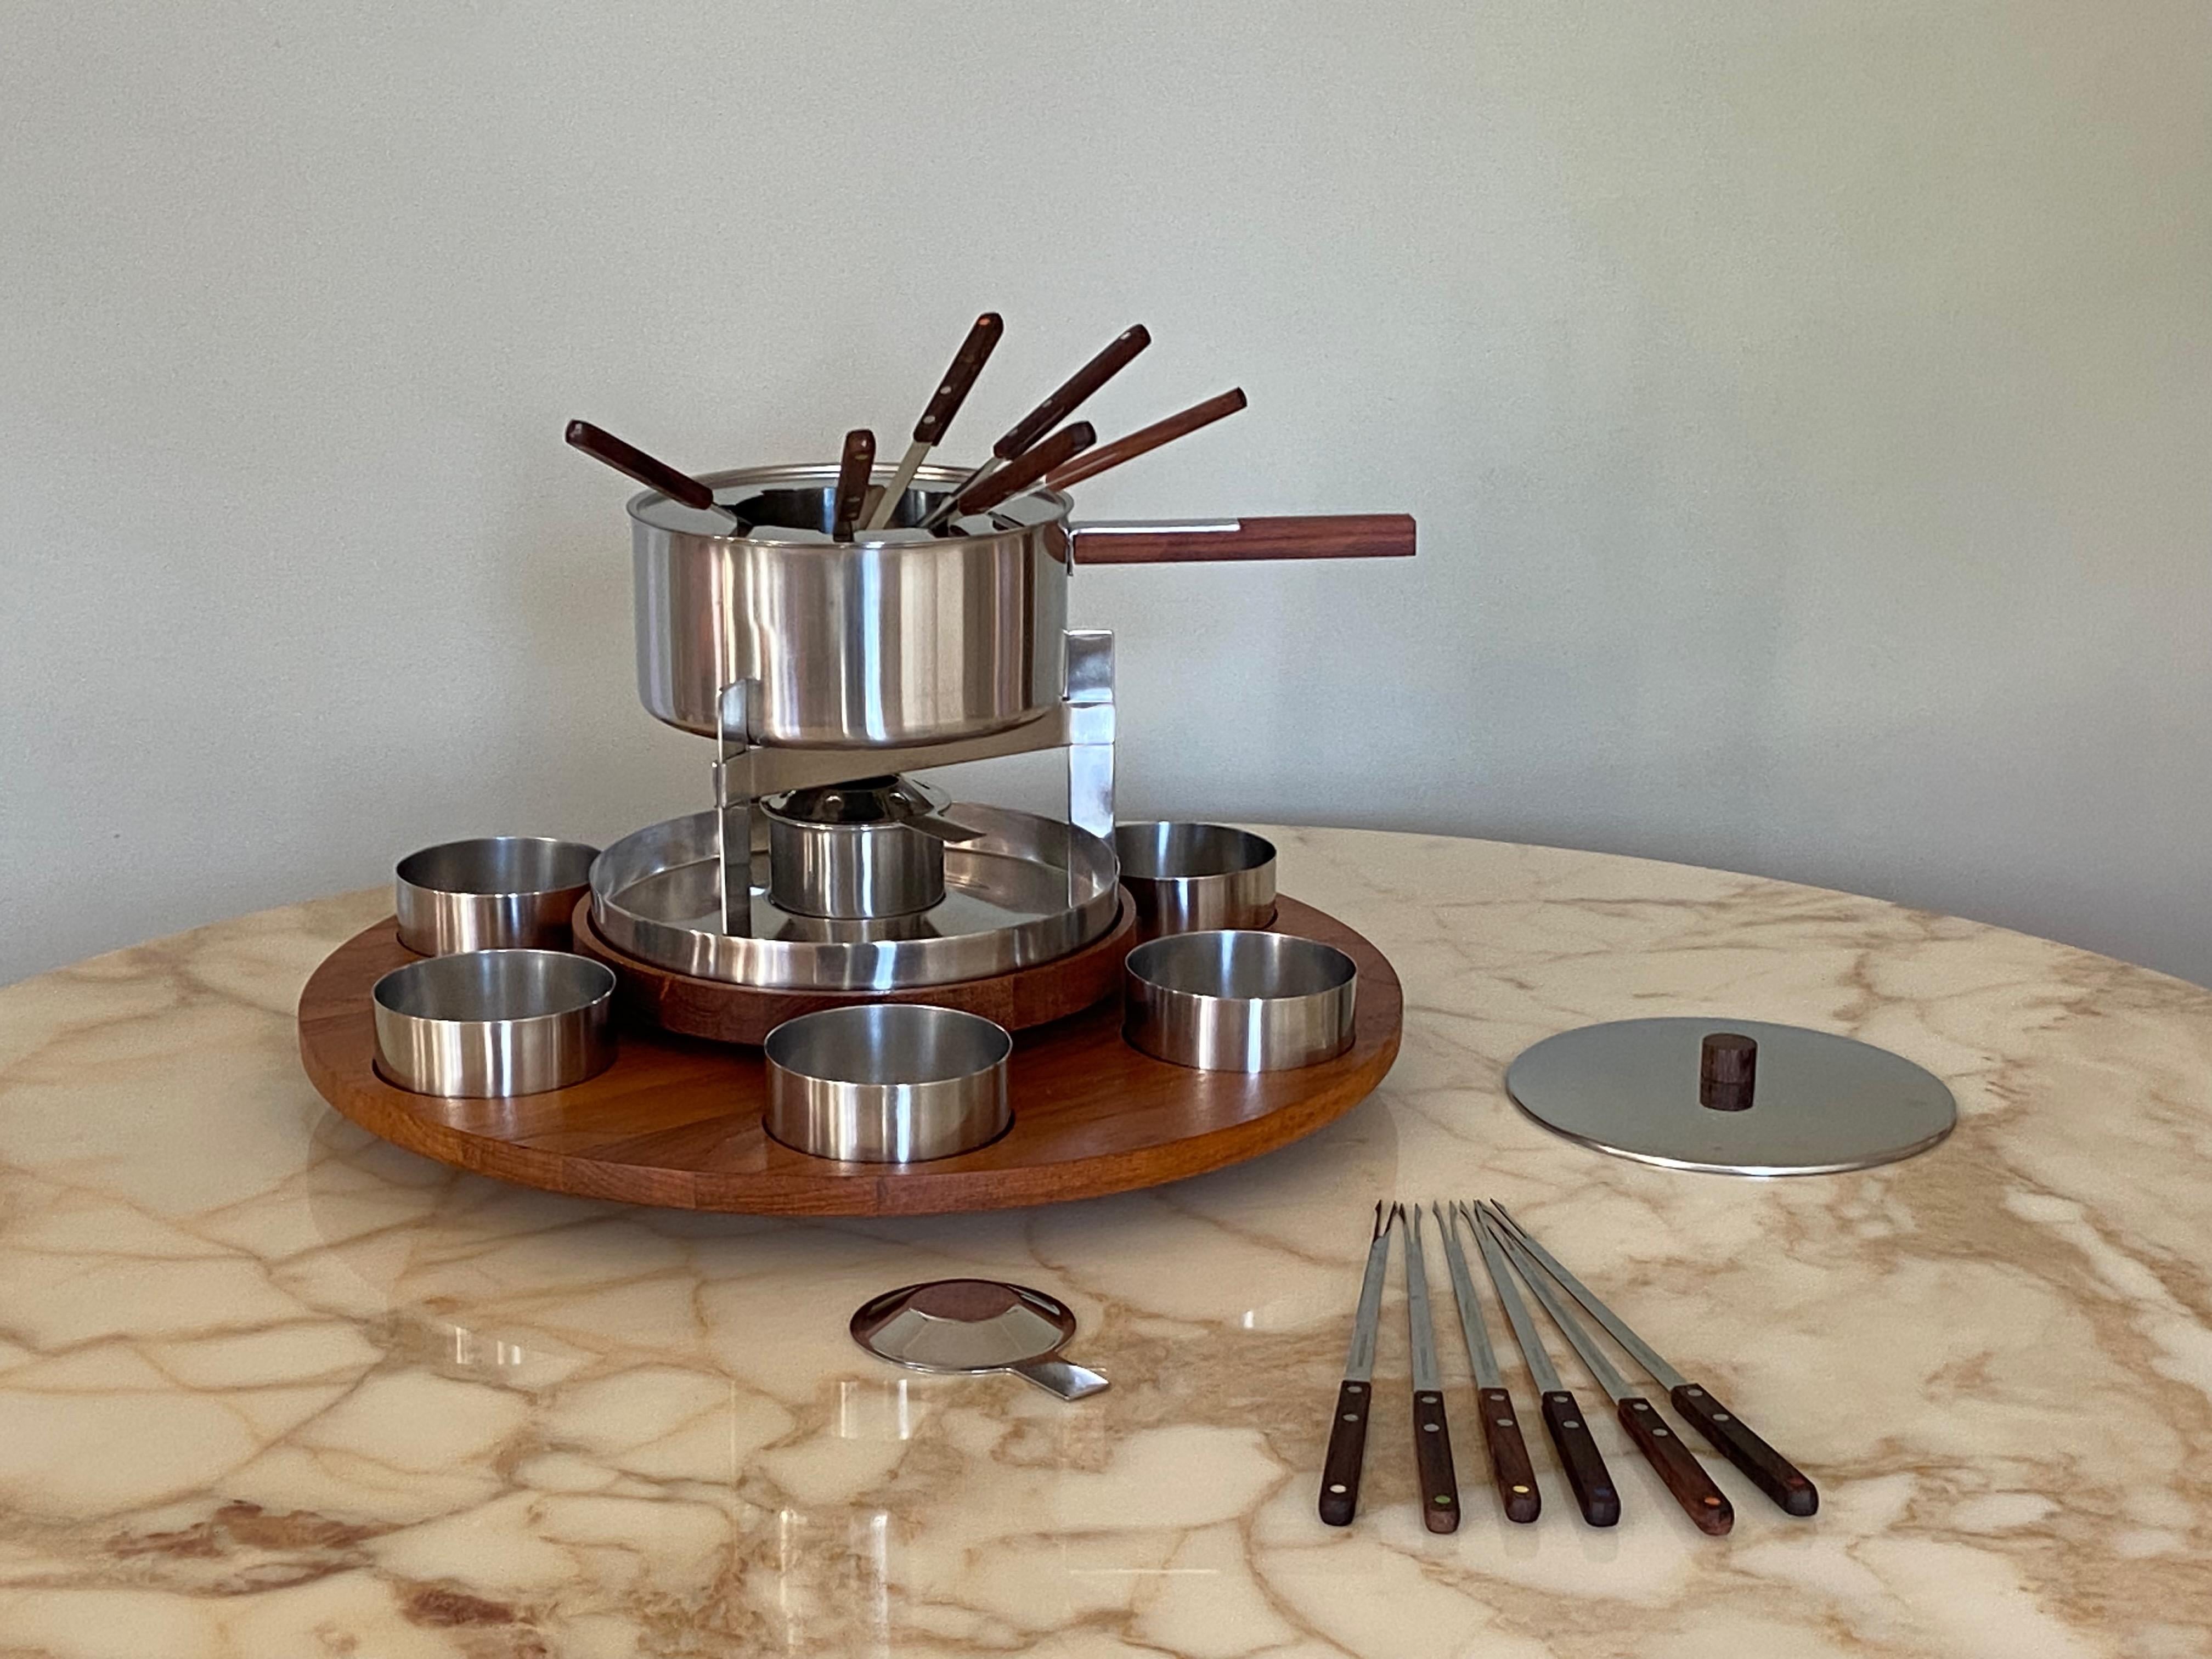 Teak and stainless steel fondue set with wood handle and Stelton Teak Lazy Susan. Designed by Danish mid-century designer Peter Homblad (stepson from Arne Jacobsen) for Stelton, Made in Denamrk. This set comes with 2 Sets original Stelton Fondue